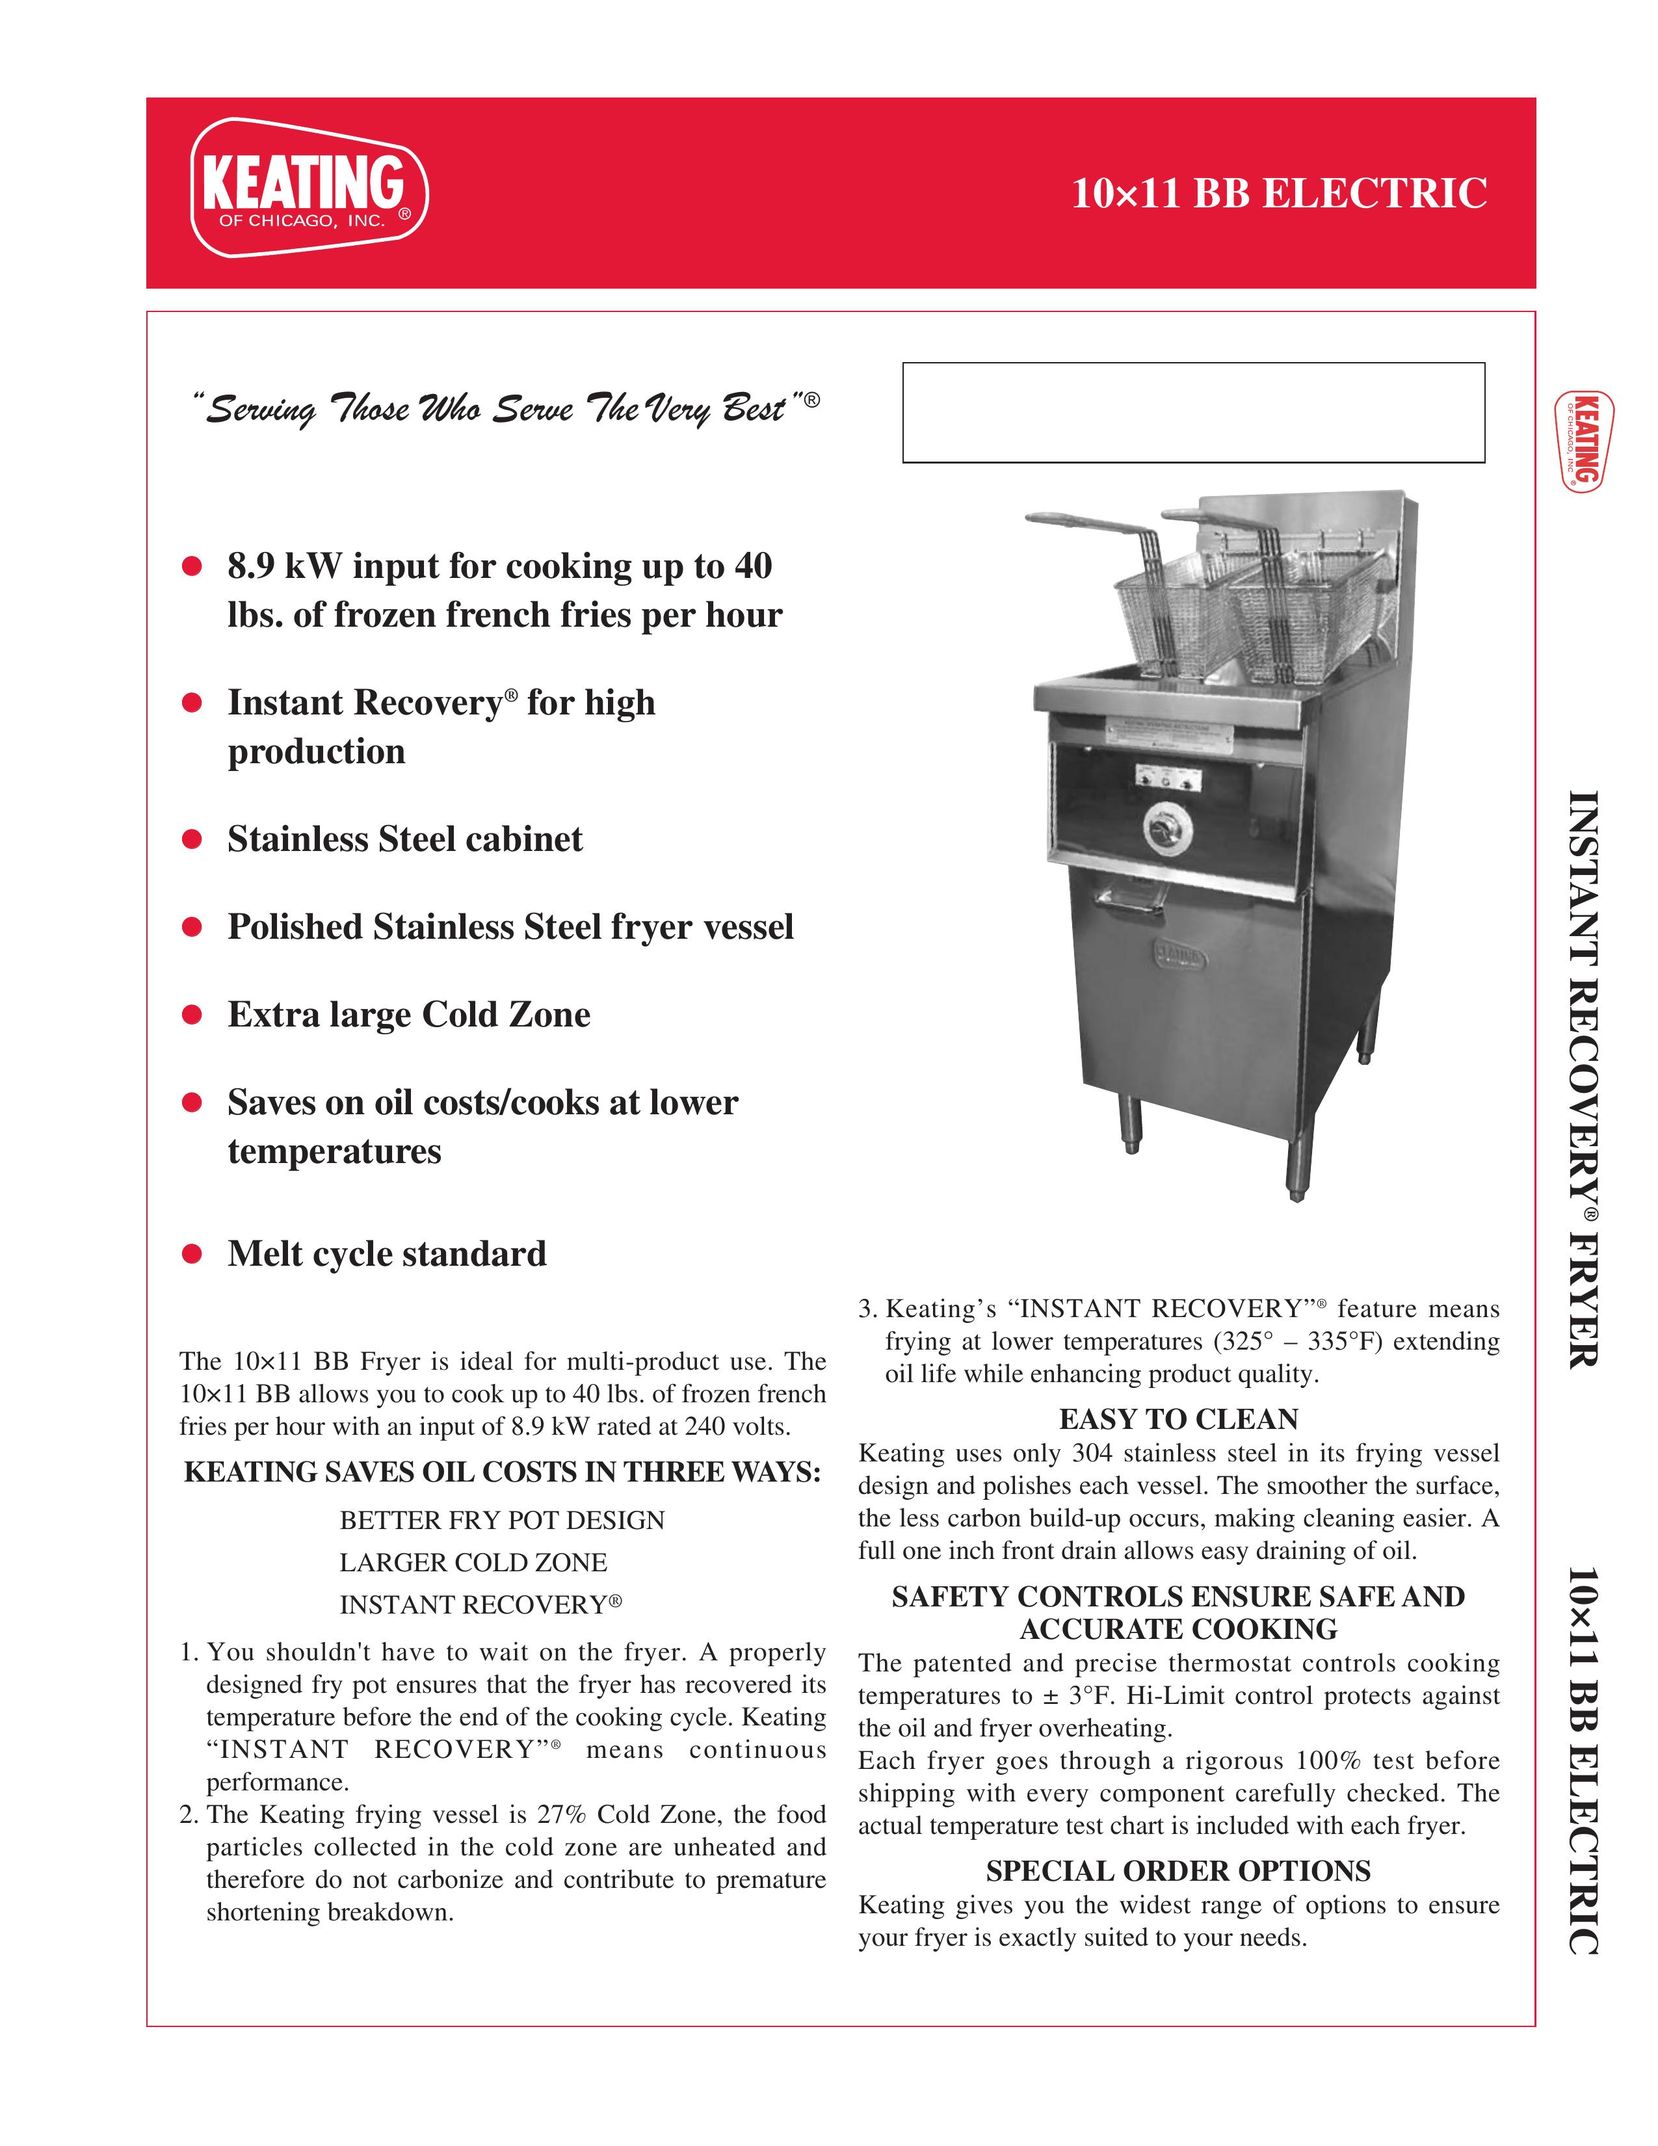 Keating Of Chicago 10x11 BB Fryer User Manual